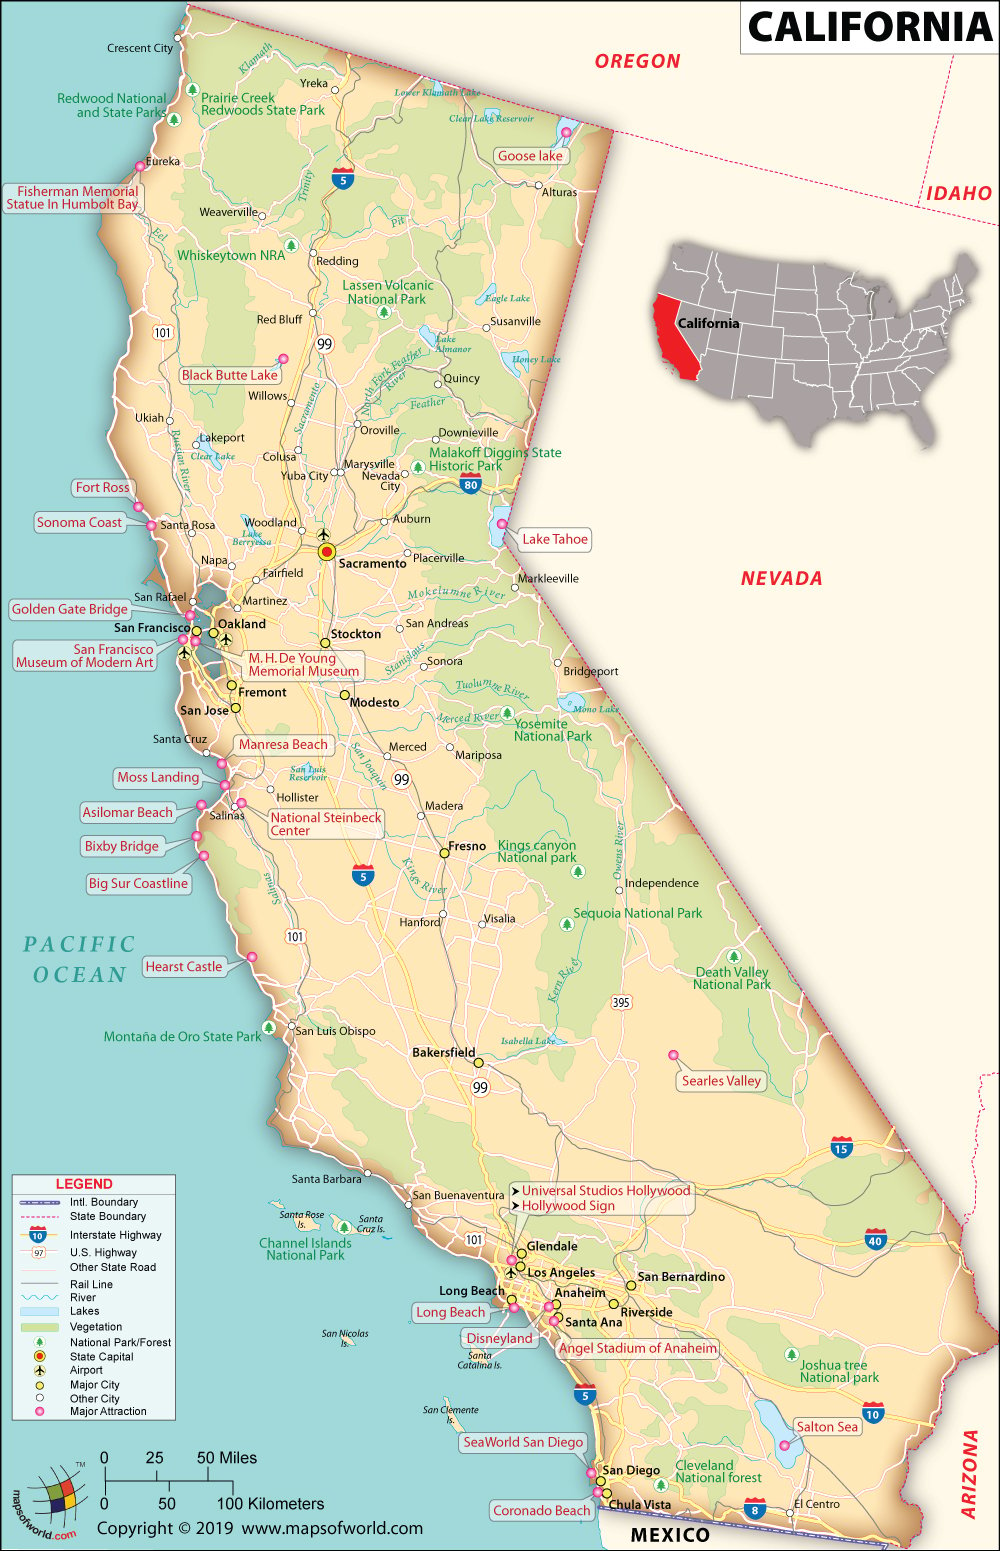 What Are The Key Facts Of California California Facts Answers